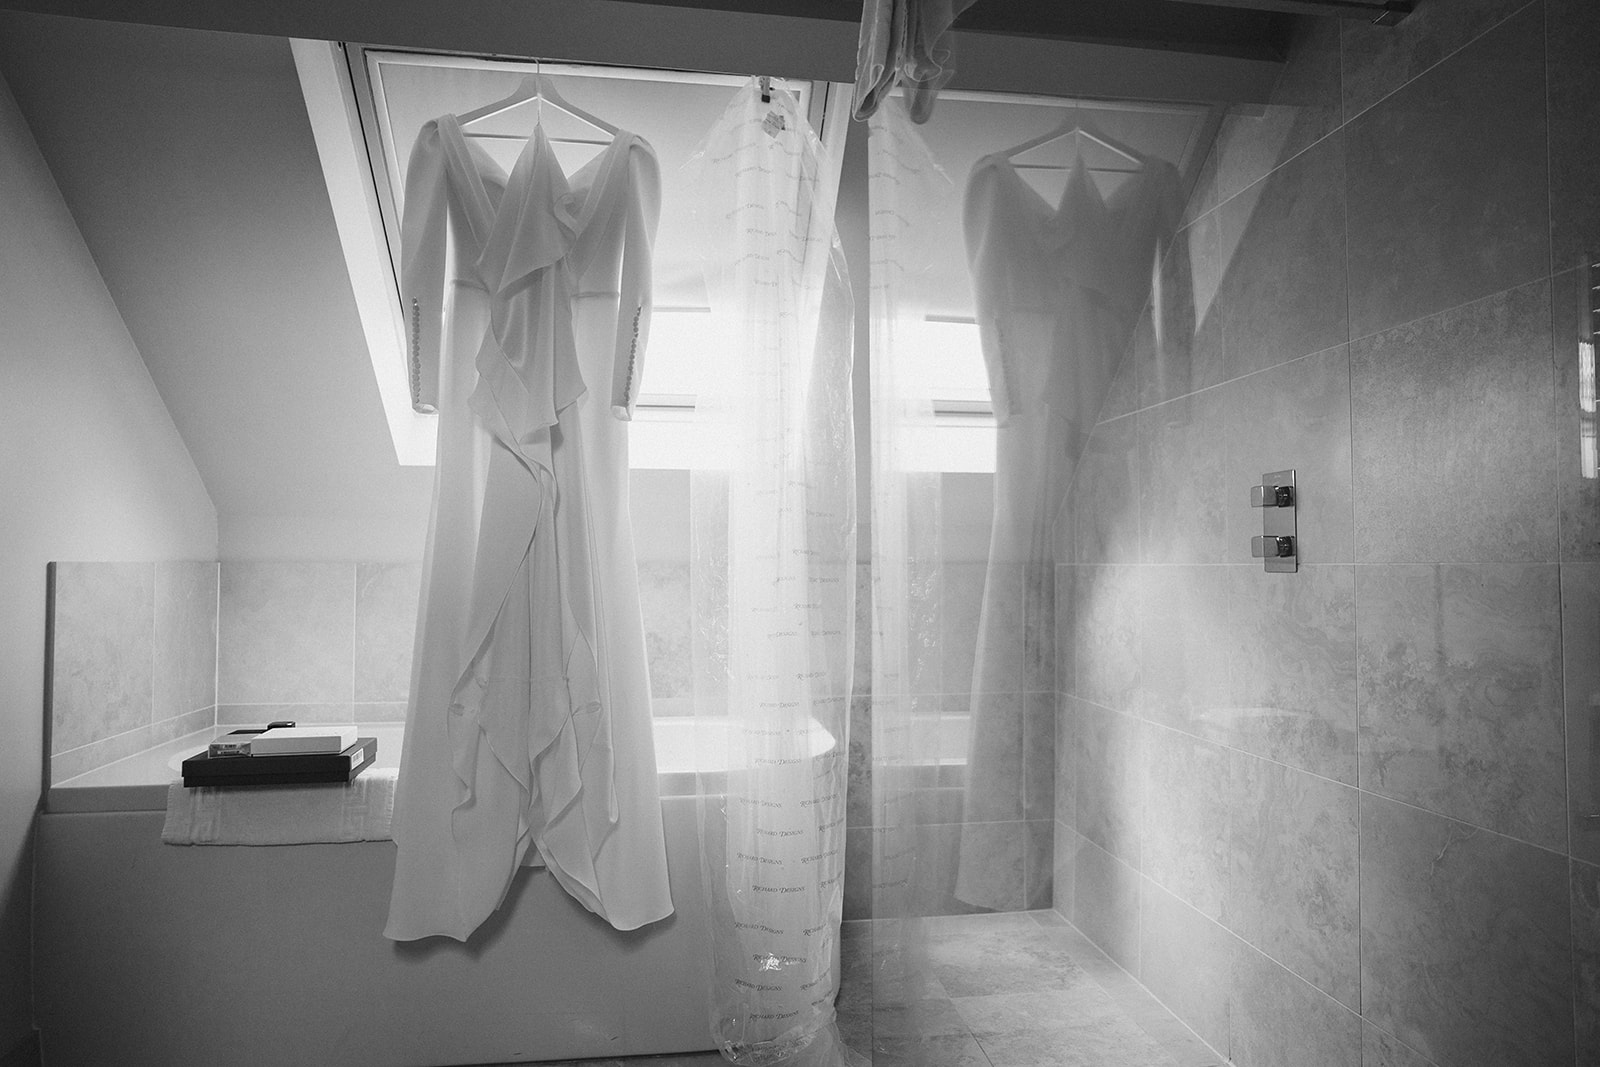 The Chequers Inn Wedding Photography - the brides dress hung up